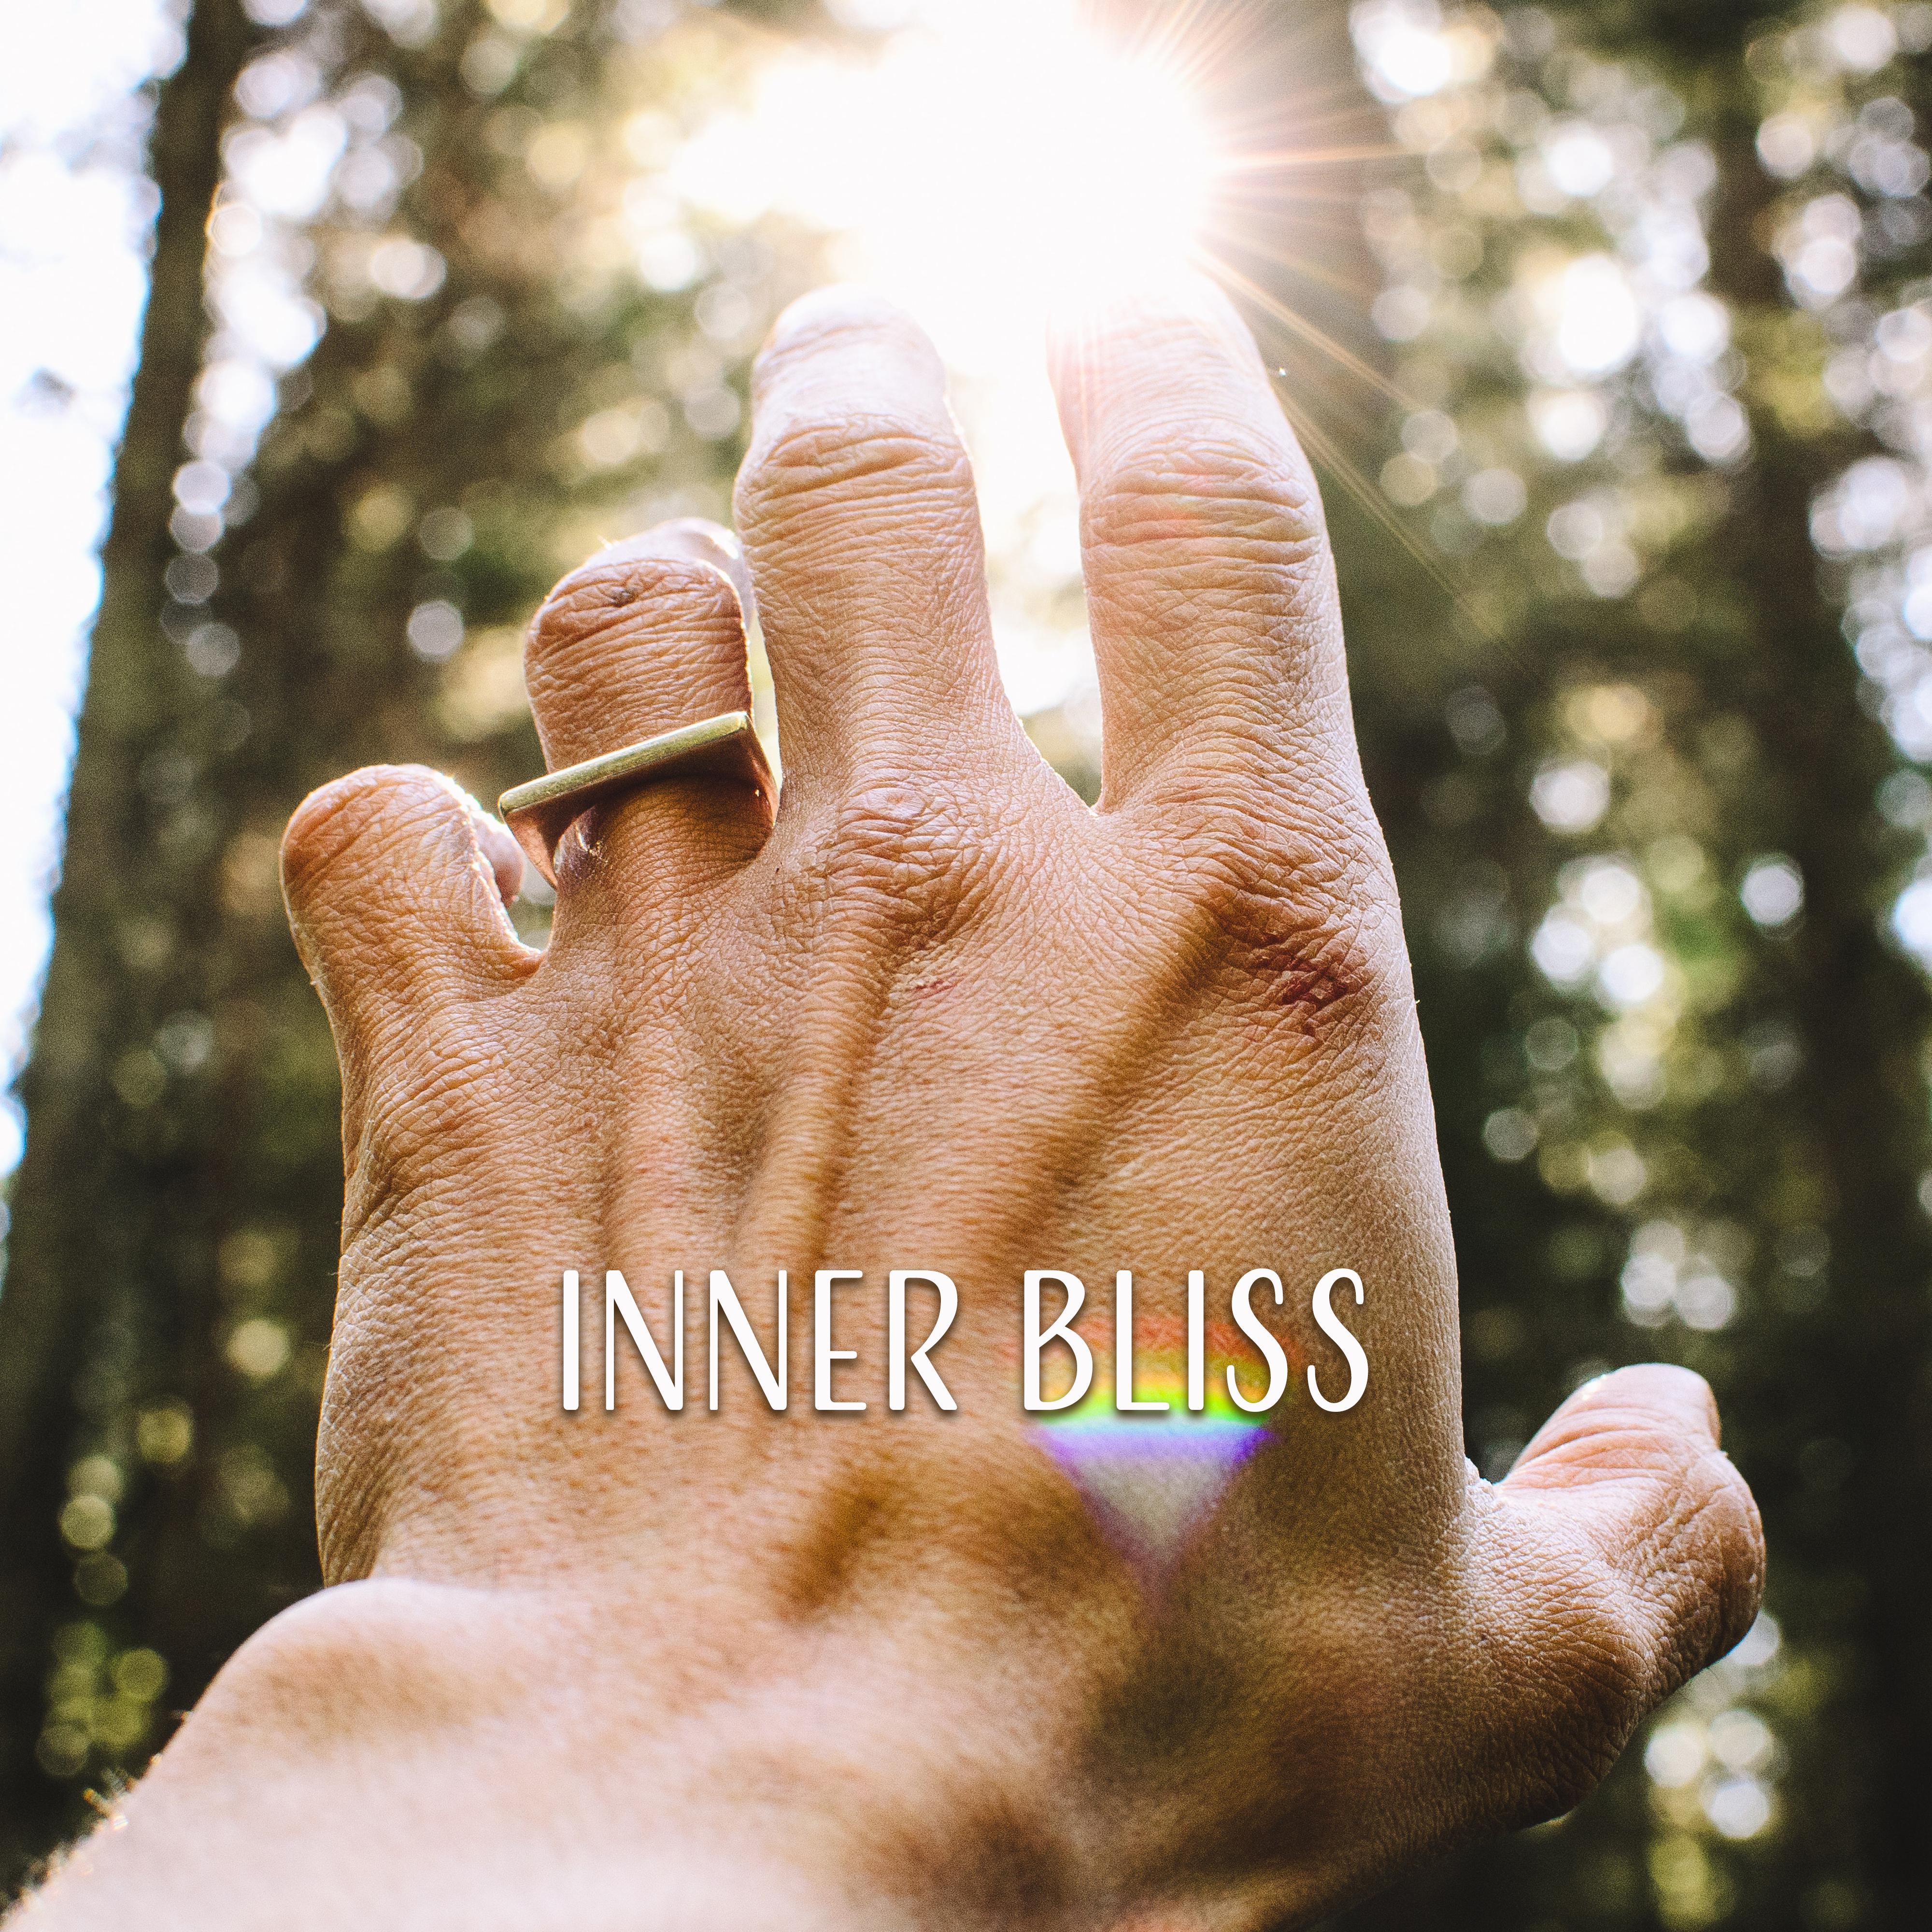 Inner Bliss – Water Sounds, Pure Relaxation, Healing Nature, Perfect Rest, Anti Stress Music